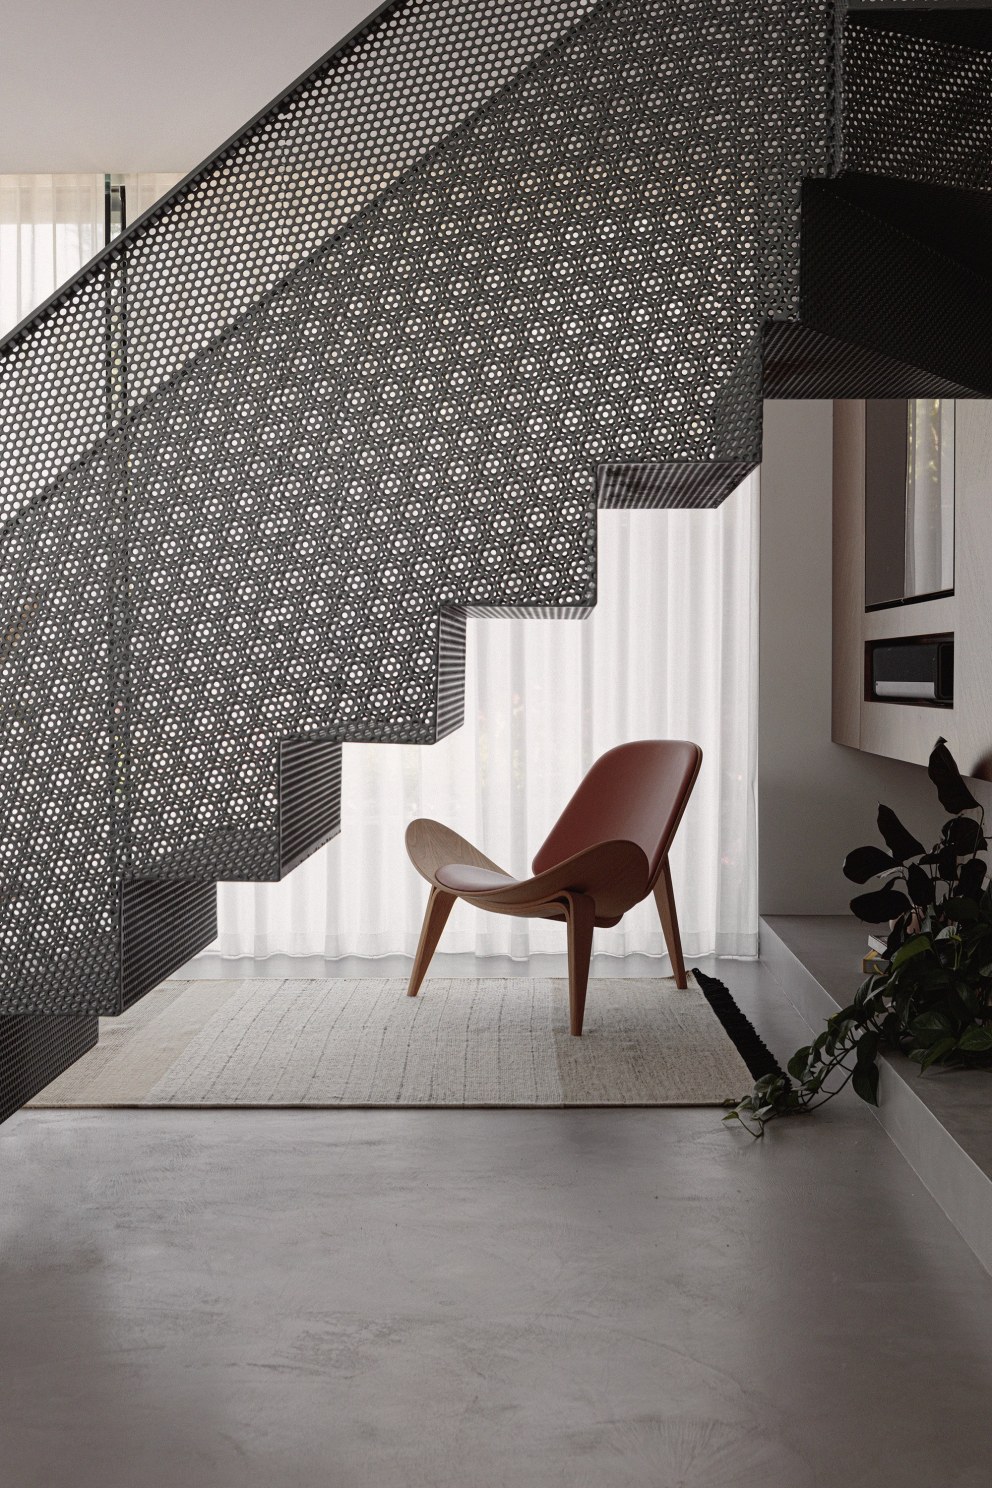 Wimbledon - New build home | Perforated staircase in main living areas | Interior Designers